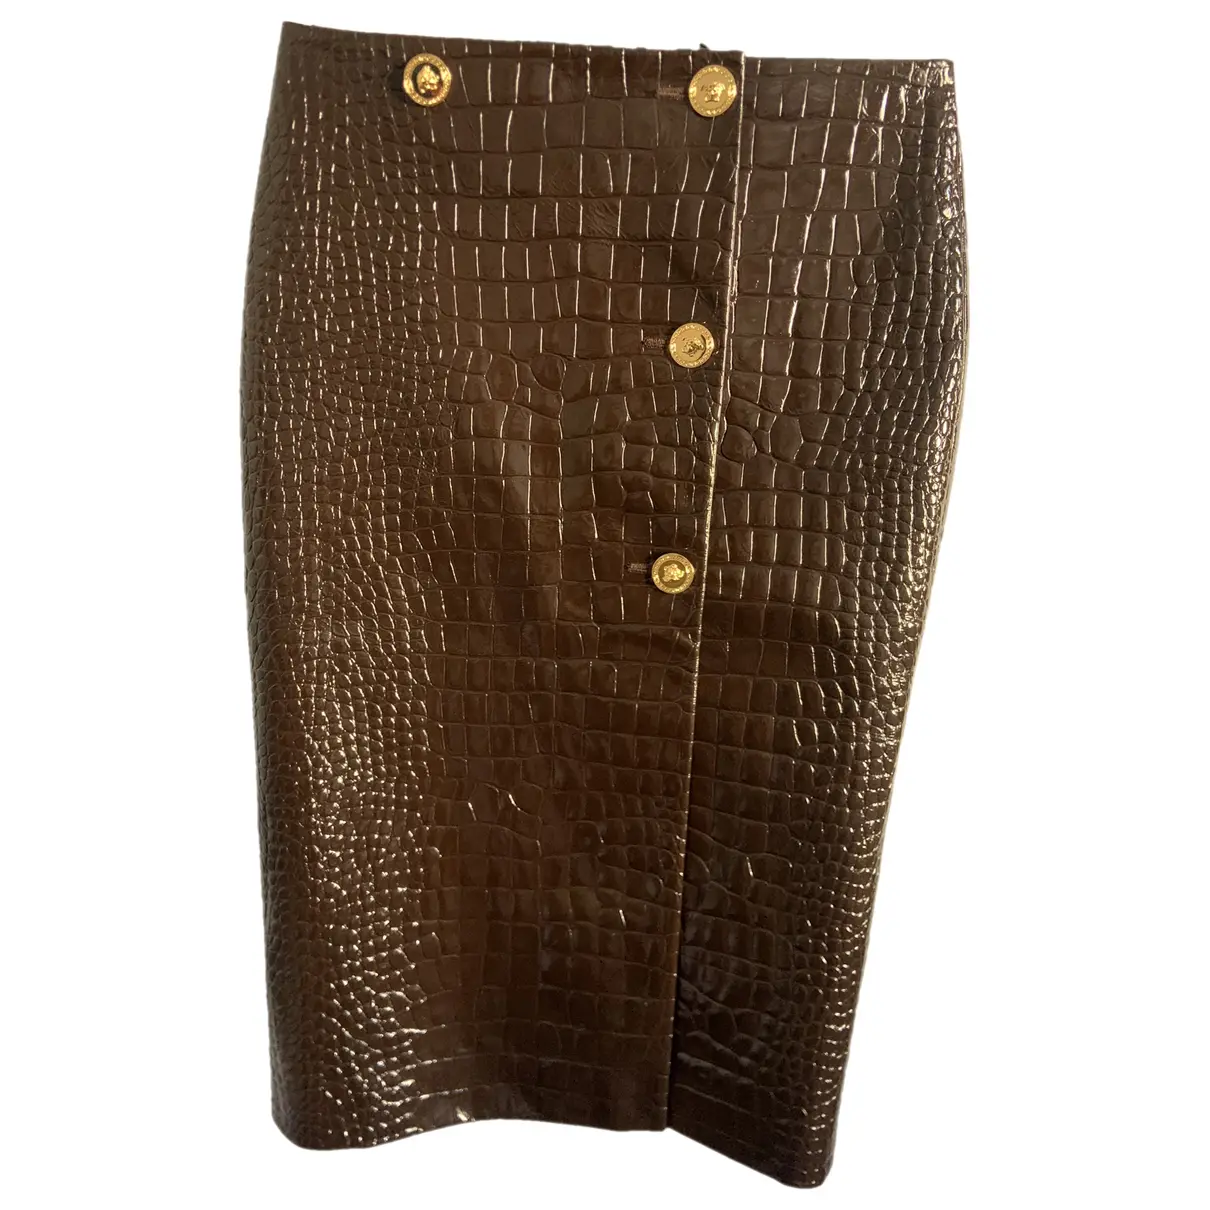 Patent leather mid-length skirt Versace